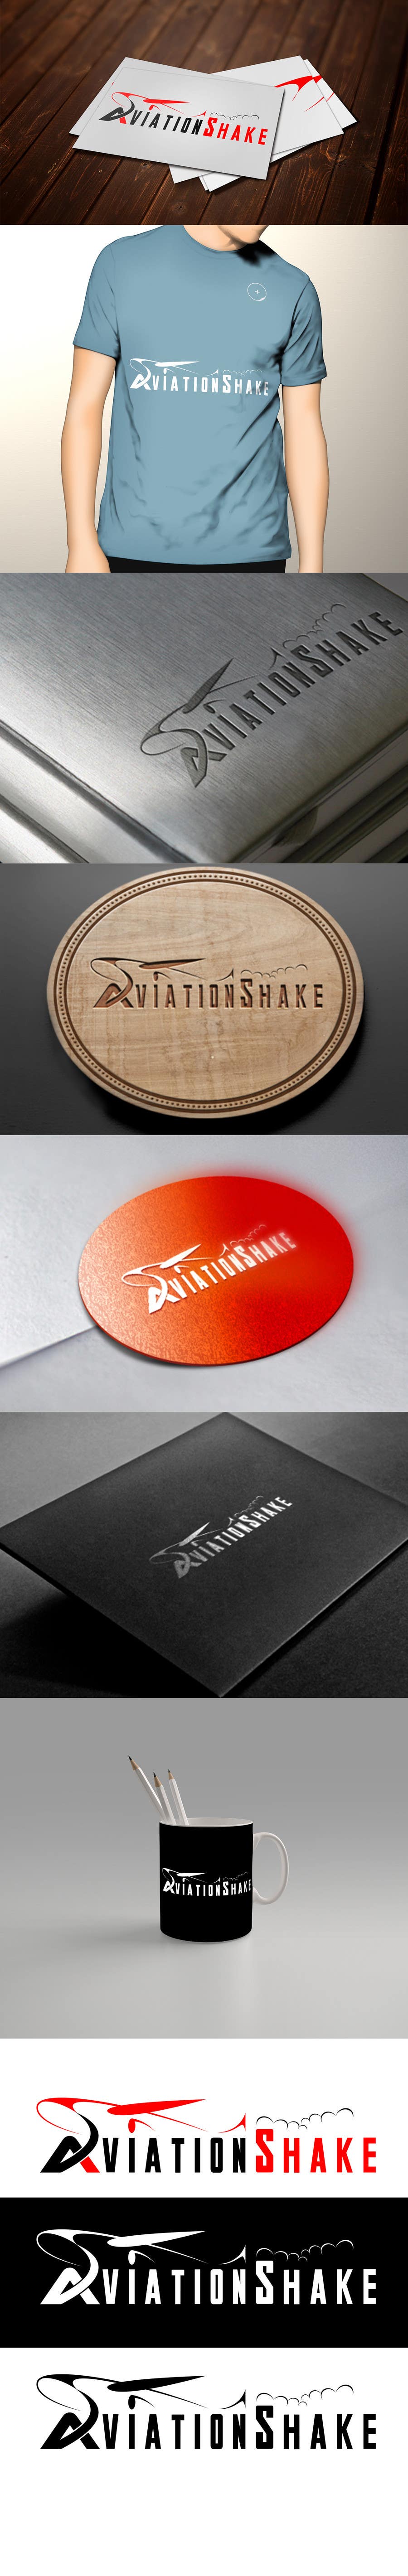 Proposition n°183 du concours                                                 Develop an Identity (logo, font, style, website mockup) for AviationShake
                                            